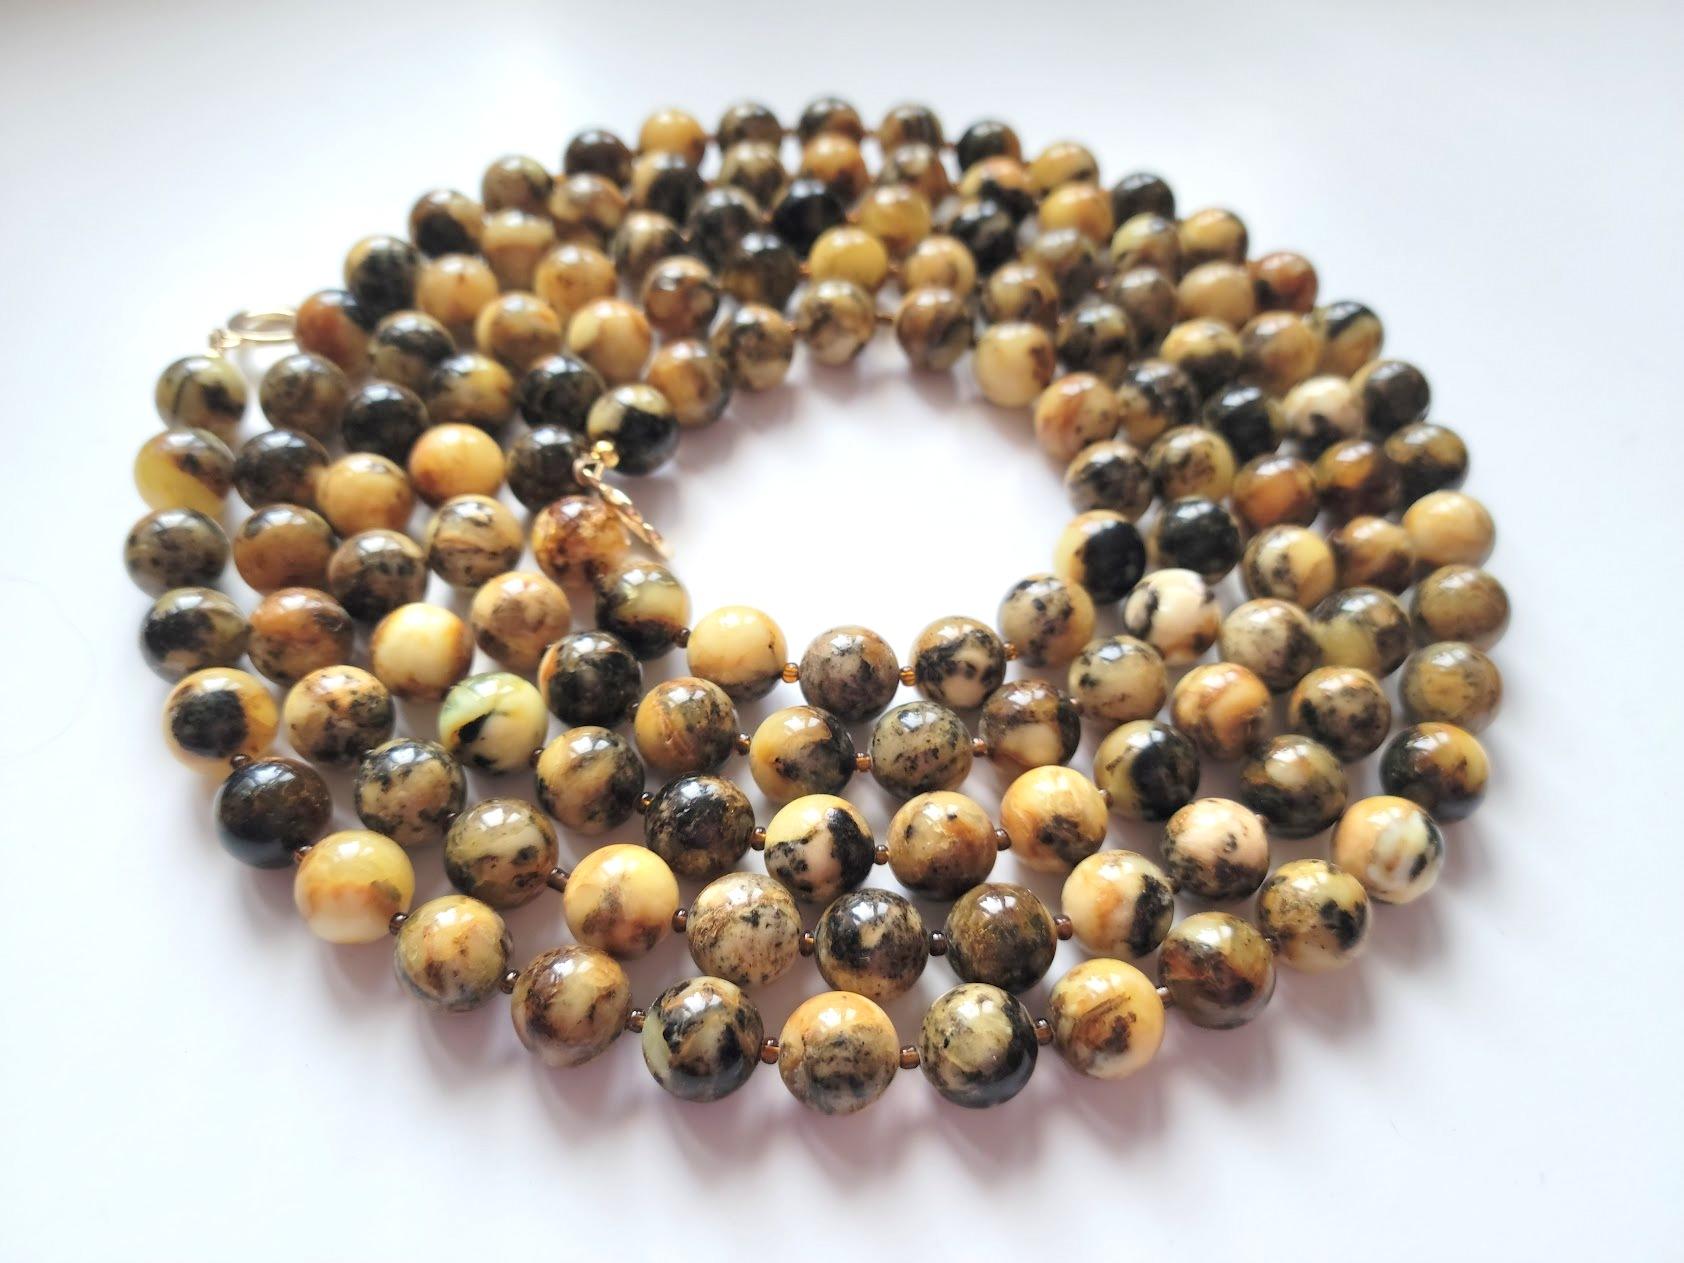 The length of the necklace is 70 inches ( 177.8 cm). Beautiful beads from rare genuine Baltic amber. The size of the beads is 12 mm.
The 